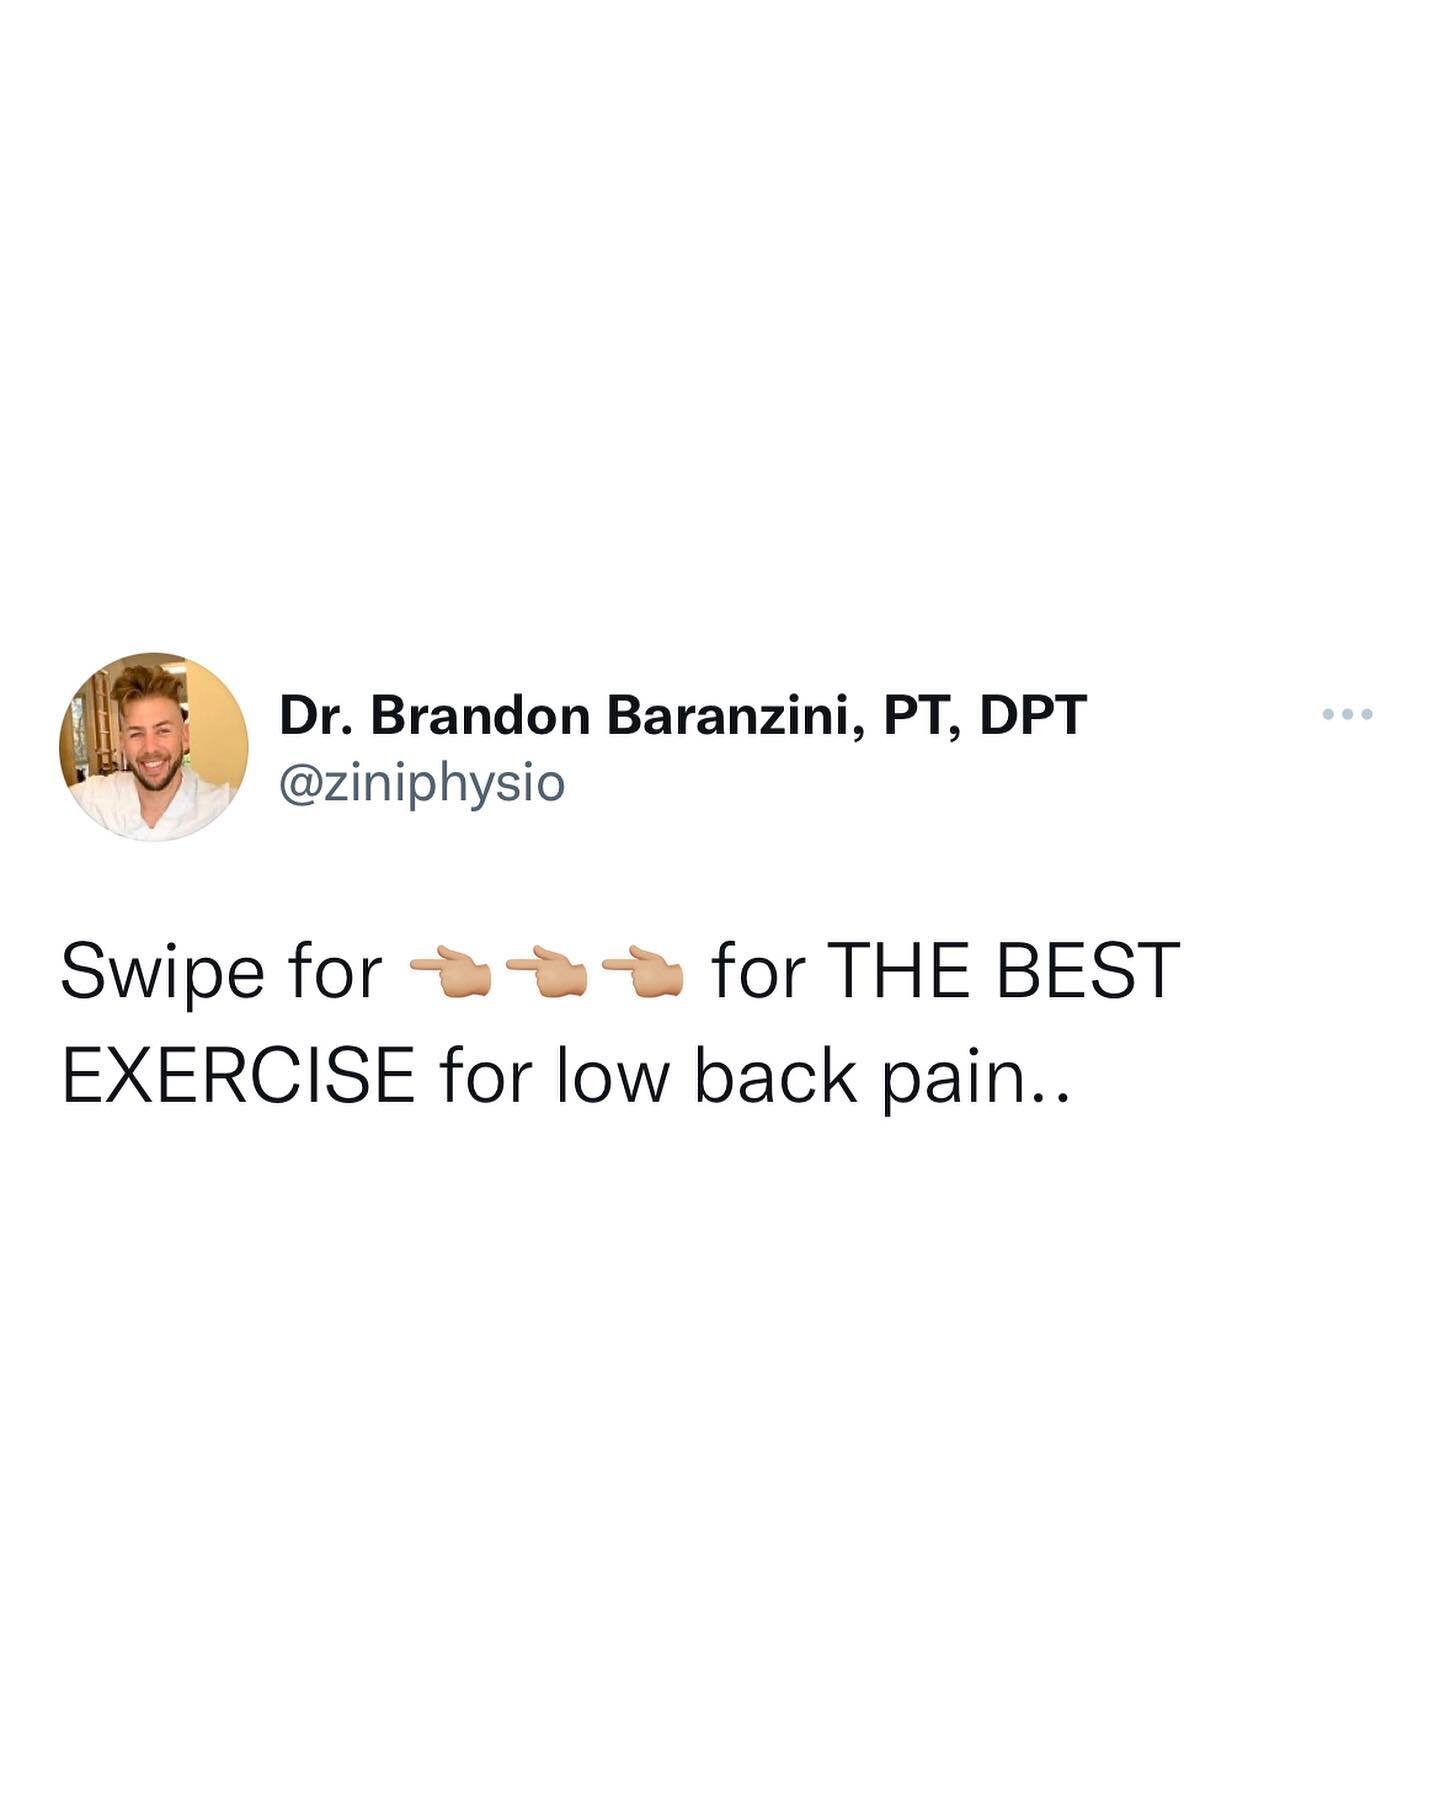 💥 THE BEST EXERCISE FOR LOW BACK PAIN 💥
&bull;
The best exercise for low back pain simply does not exist.
&bull;
Exercises are prescribed by physical therapists tailored to patients&rsquo; specific movement needs based on the assessment.
&bull;
An 